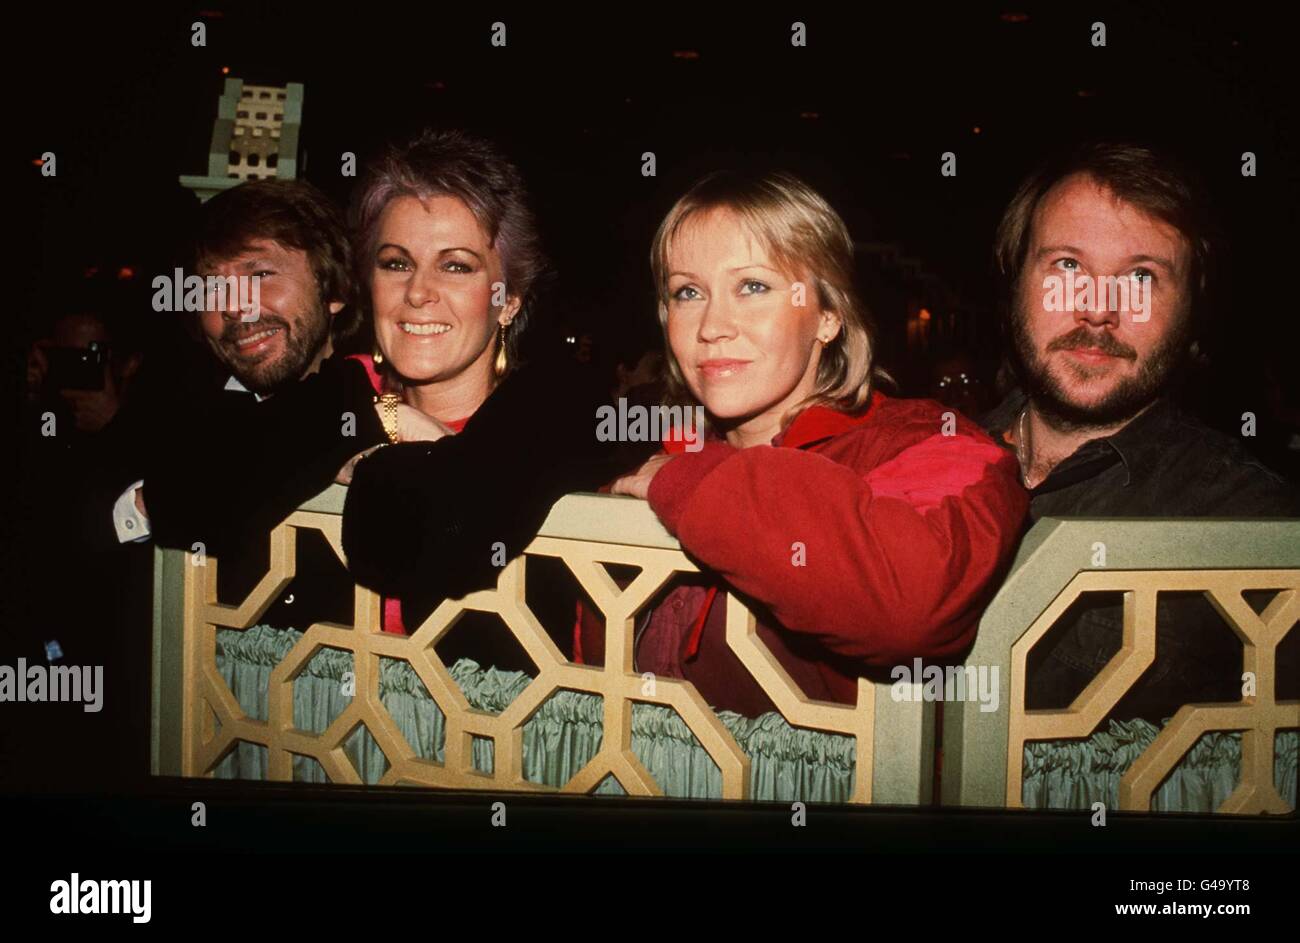 PA NEWS PHOTO 5/11/82: SWEDISH POP GROUP 'ABBA' AT THE DORCHESTER HOTEL, LONDON TO CELEBRATE THEIR LATEST ALBUM RELEASE 'THE SINGLES: THE FIRST TEN YEARS' (LEFT TO RIGHT) BENNY, ANNI-FRIDA, AGNETHA AND BJORN. Stock Photo